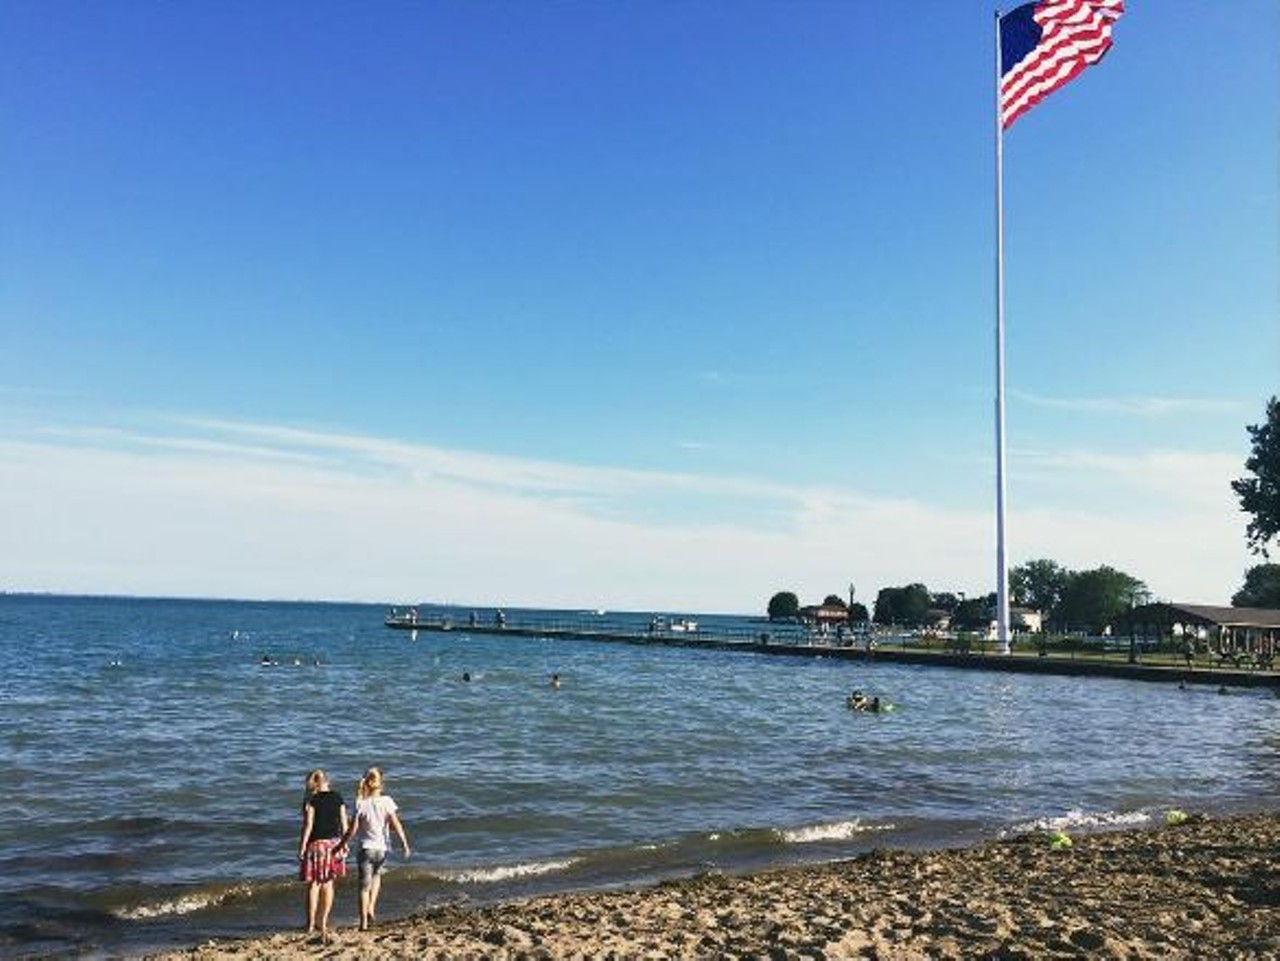 New Baltimore
40 minutes from Detroit
Located smack-dab in the middle of Anchor Bay on Lake St. Claire, New Baltimore is a great distillation of the Michigan experience. The New Baltimore Farmer&#146;s Market runs from mid-May to mid-October, and features an excellent variety of homegrown products. Photo via IG user @kimberlyjanderson.